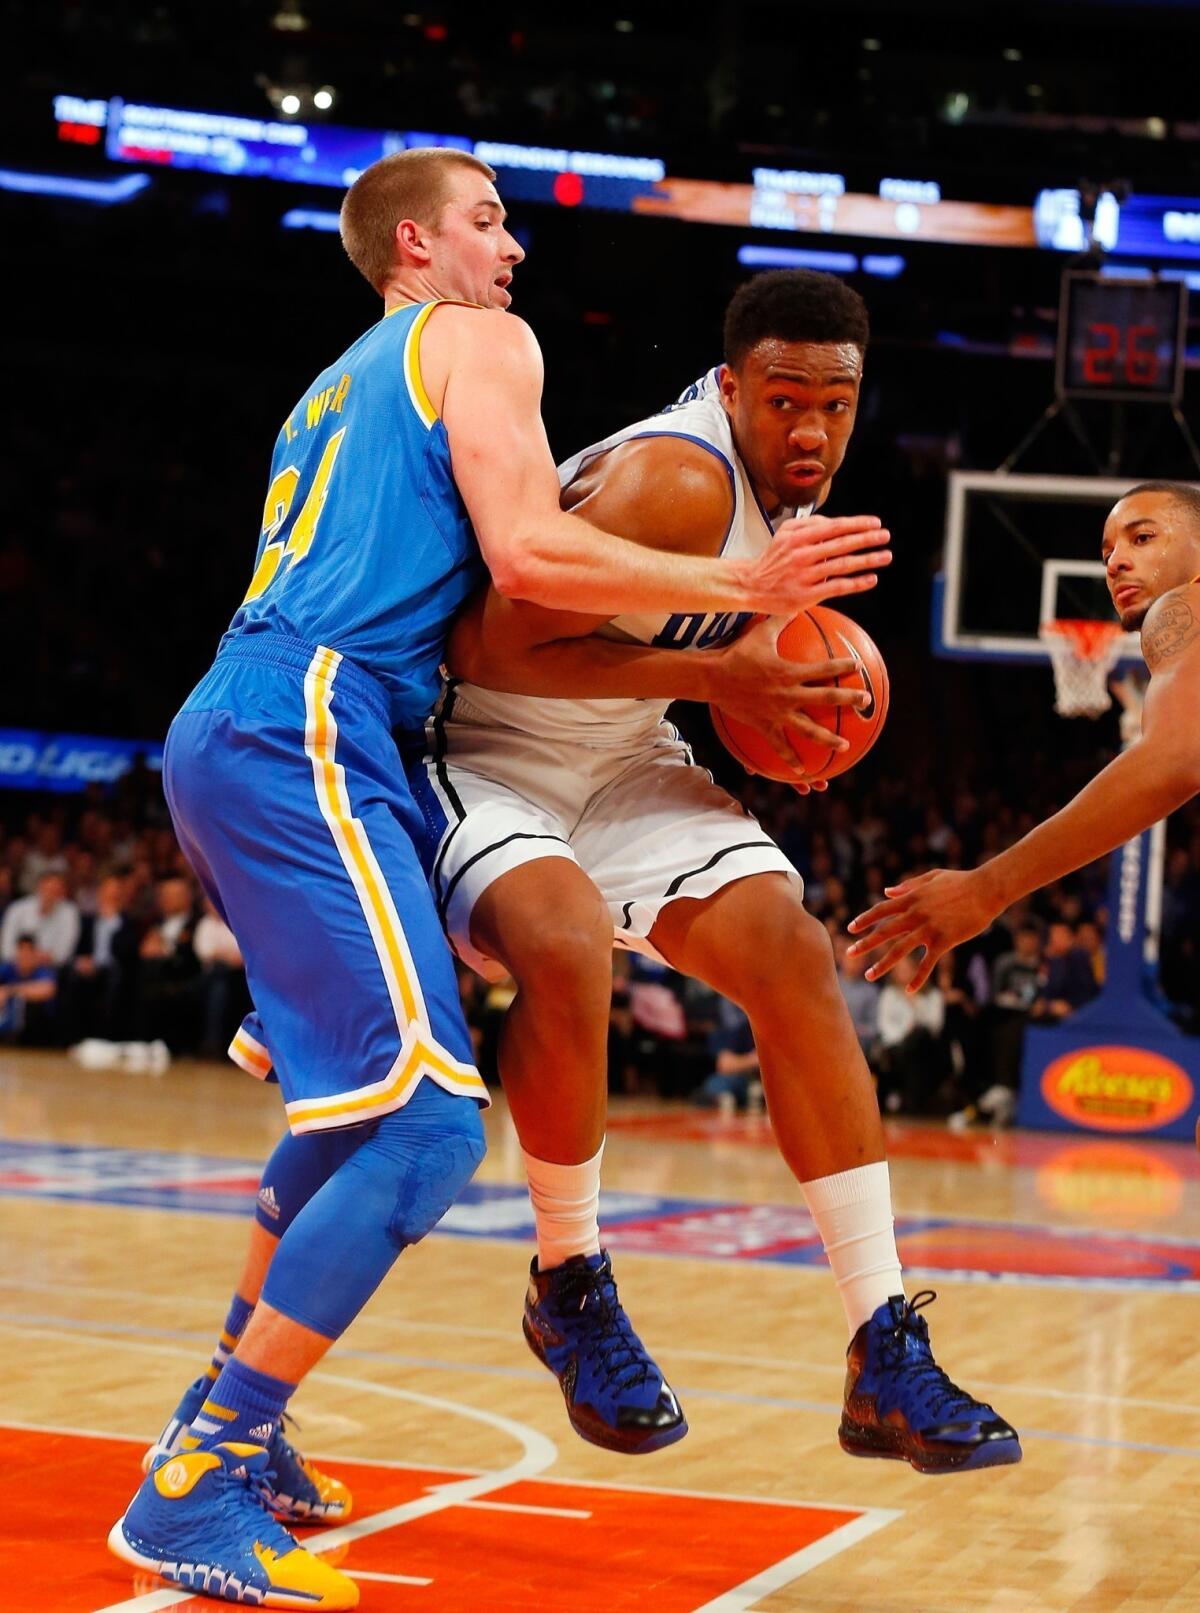 Duke's Jabari Parker, right, drives to the basket on UCLA's Travis Wear during the Bruins' 80-63 loss Thursday at Madison Square Garden in New York.